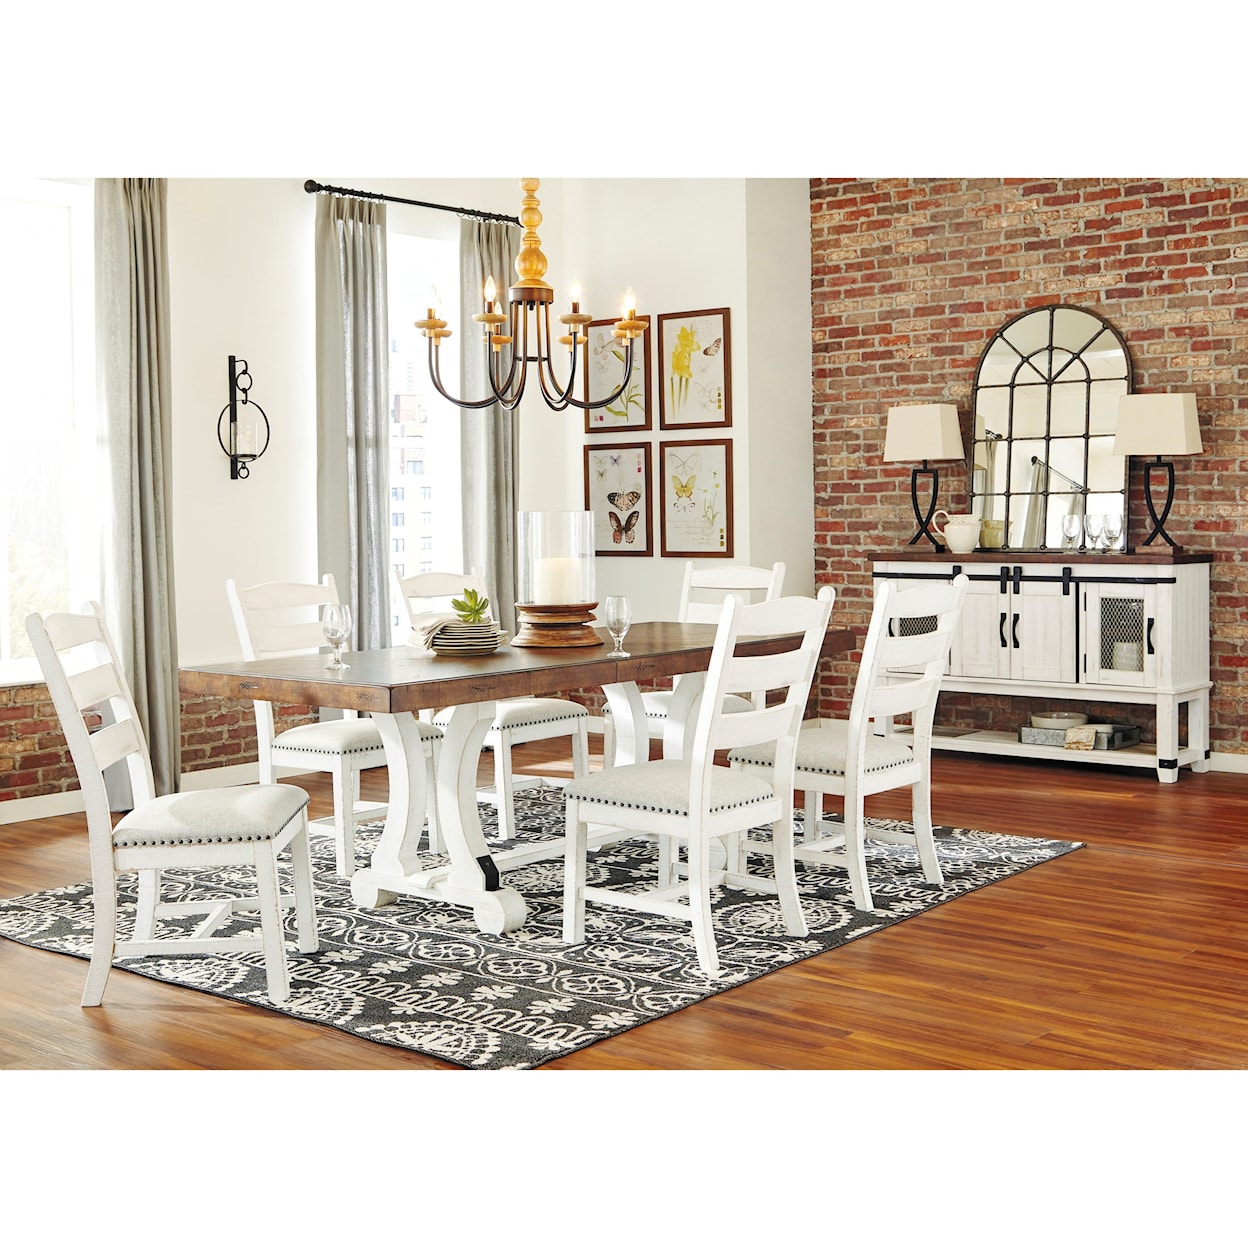 Signature Design by Ashley Furniture Valebeck Formal Dining Room Group